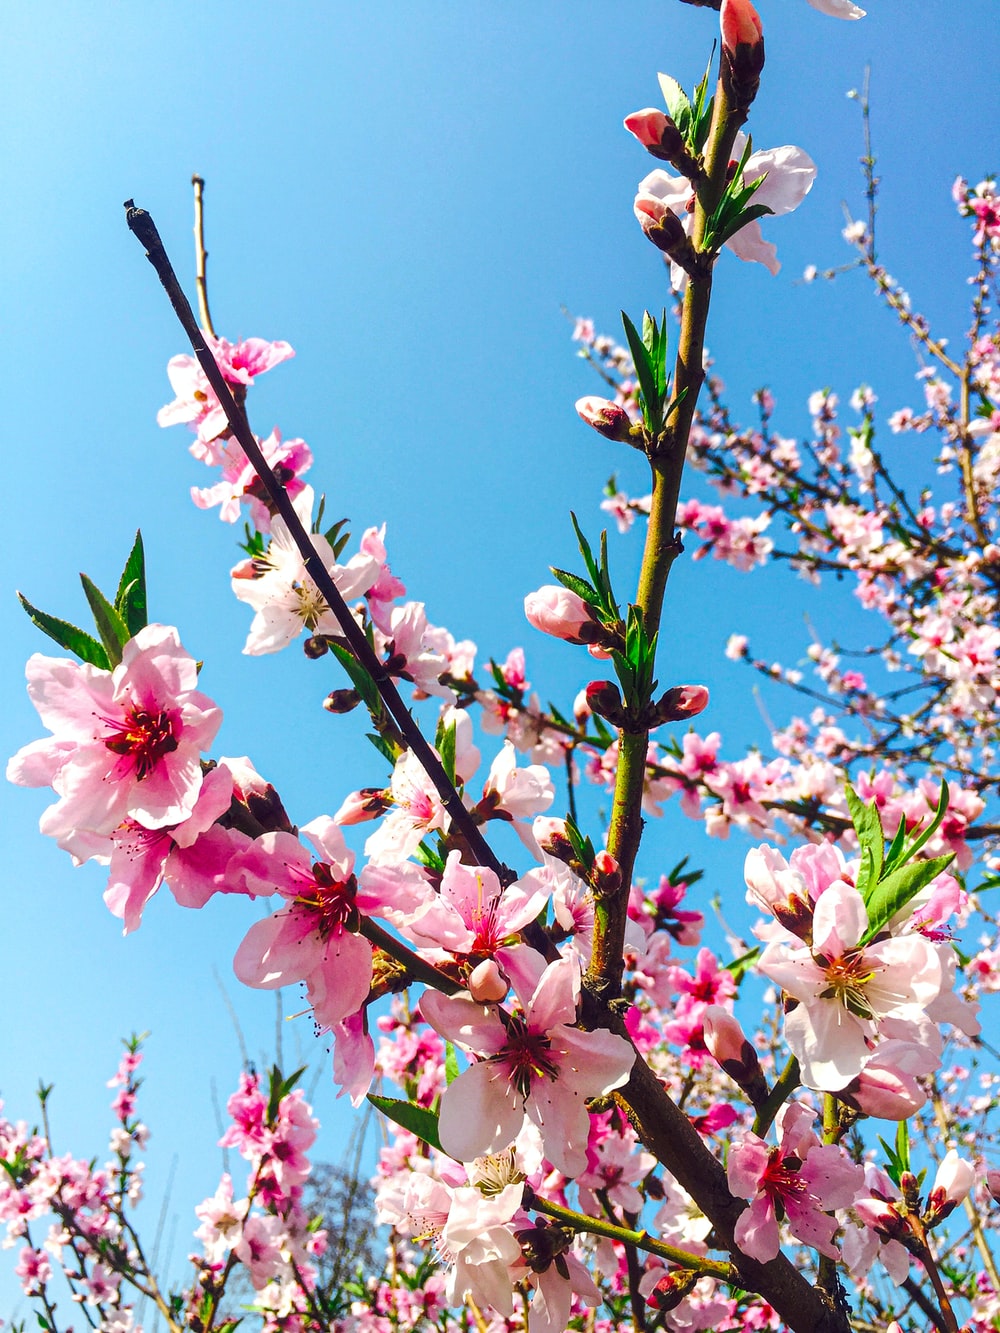 Peach Blossom Picture. Download Free Image